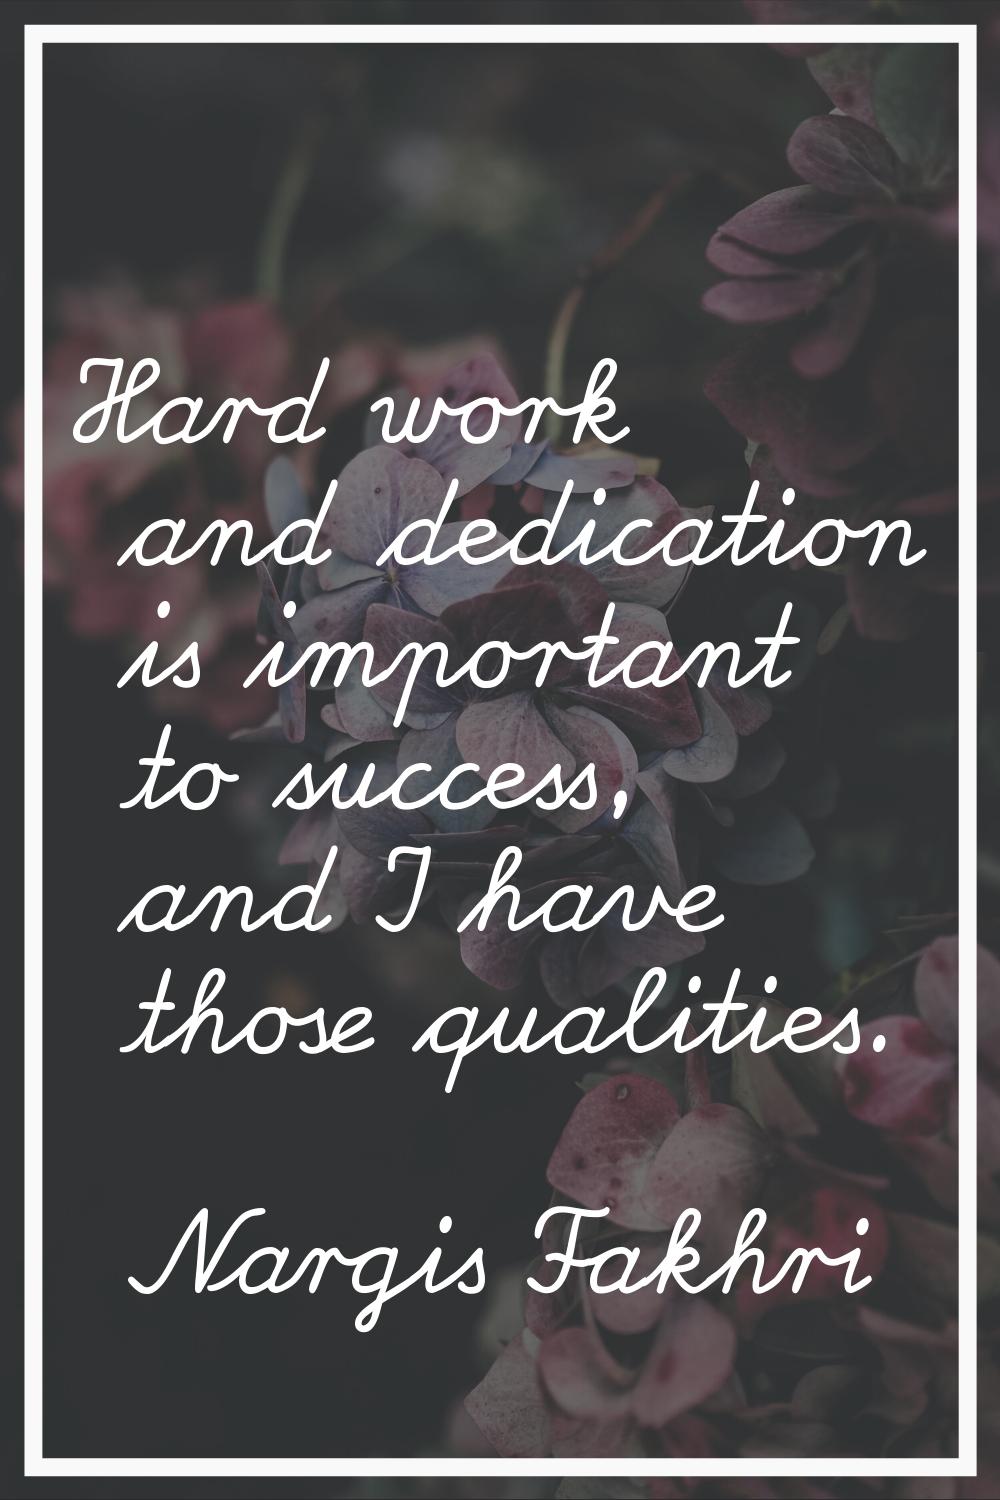 Hard work and dedication is important to success, and I have those qualities.